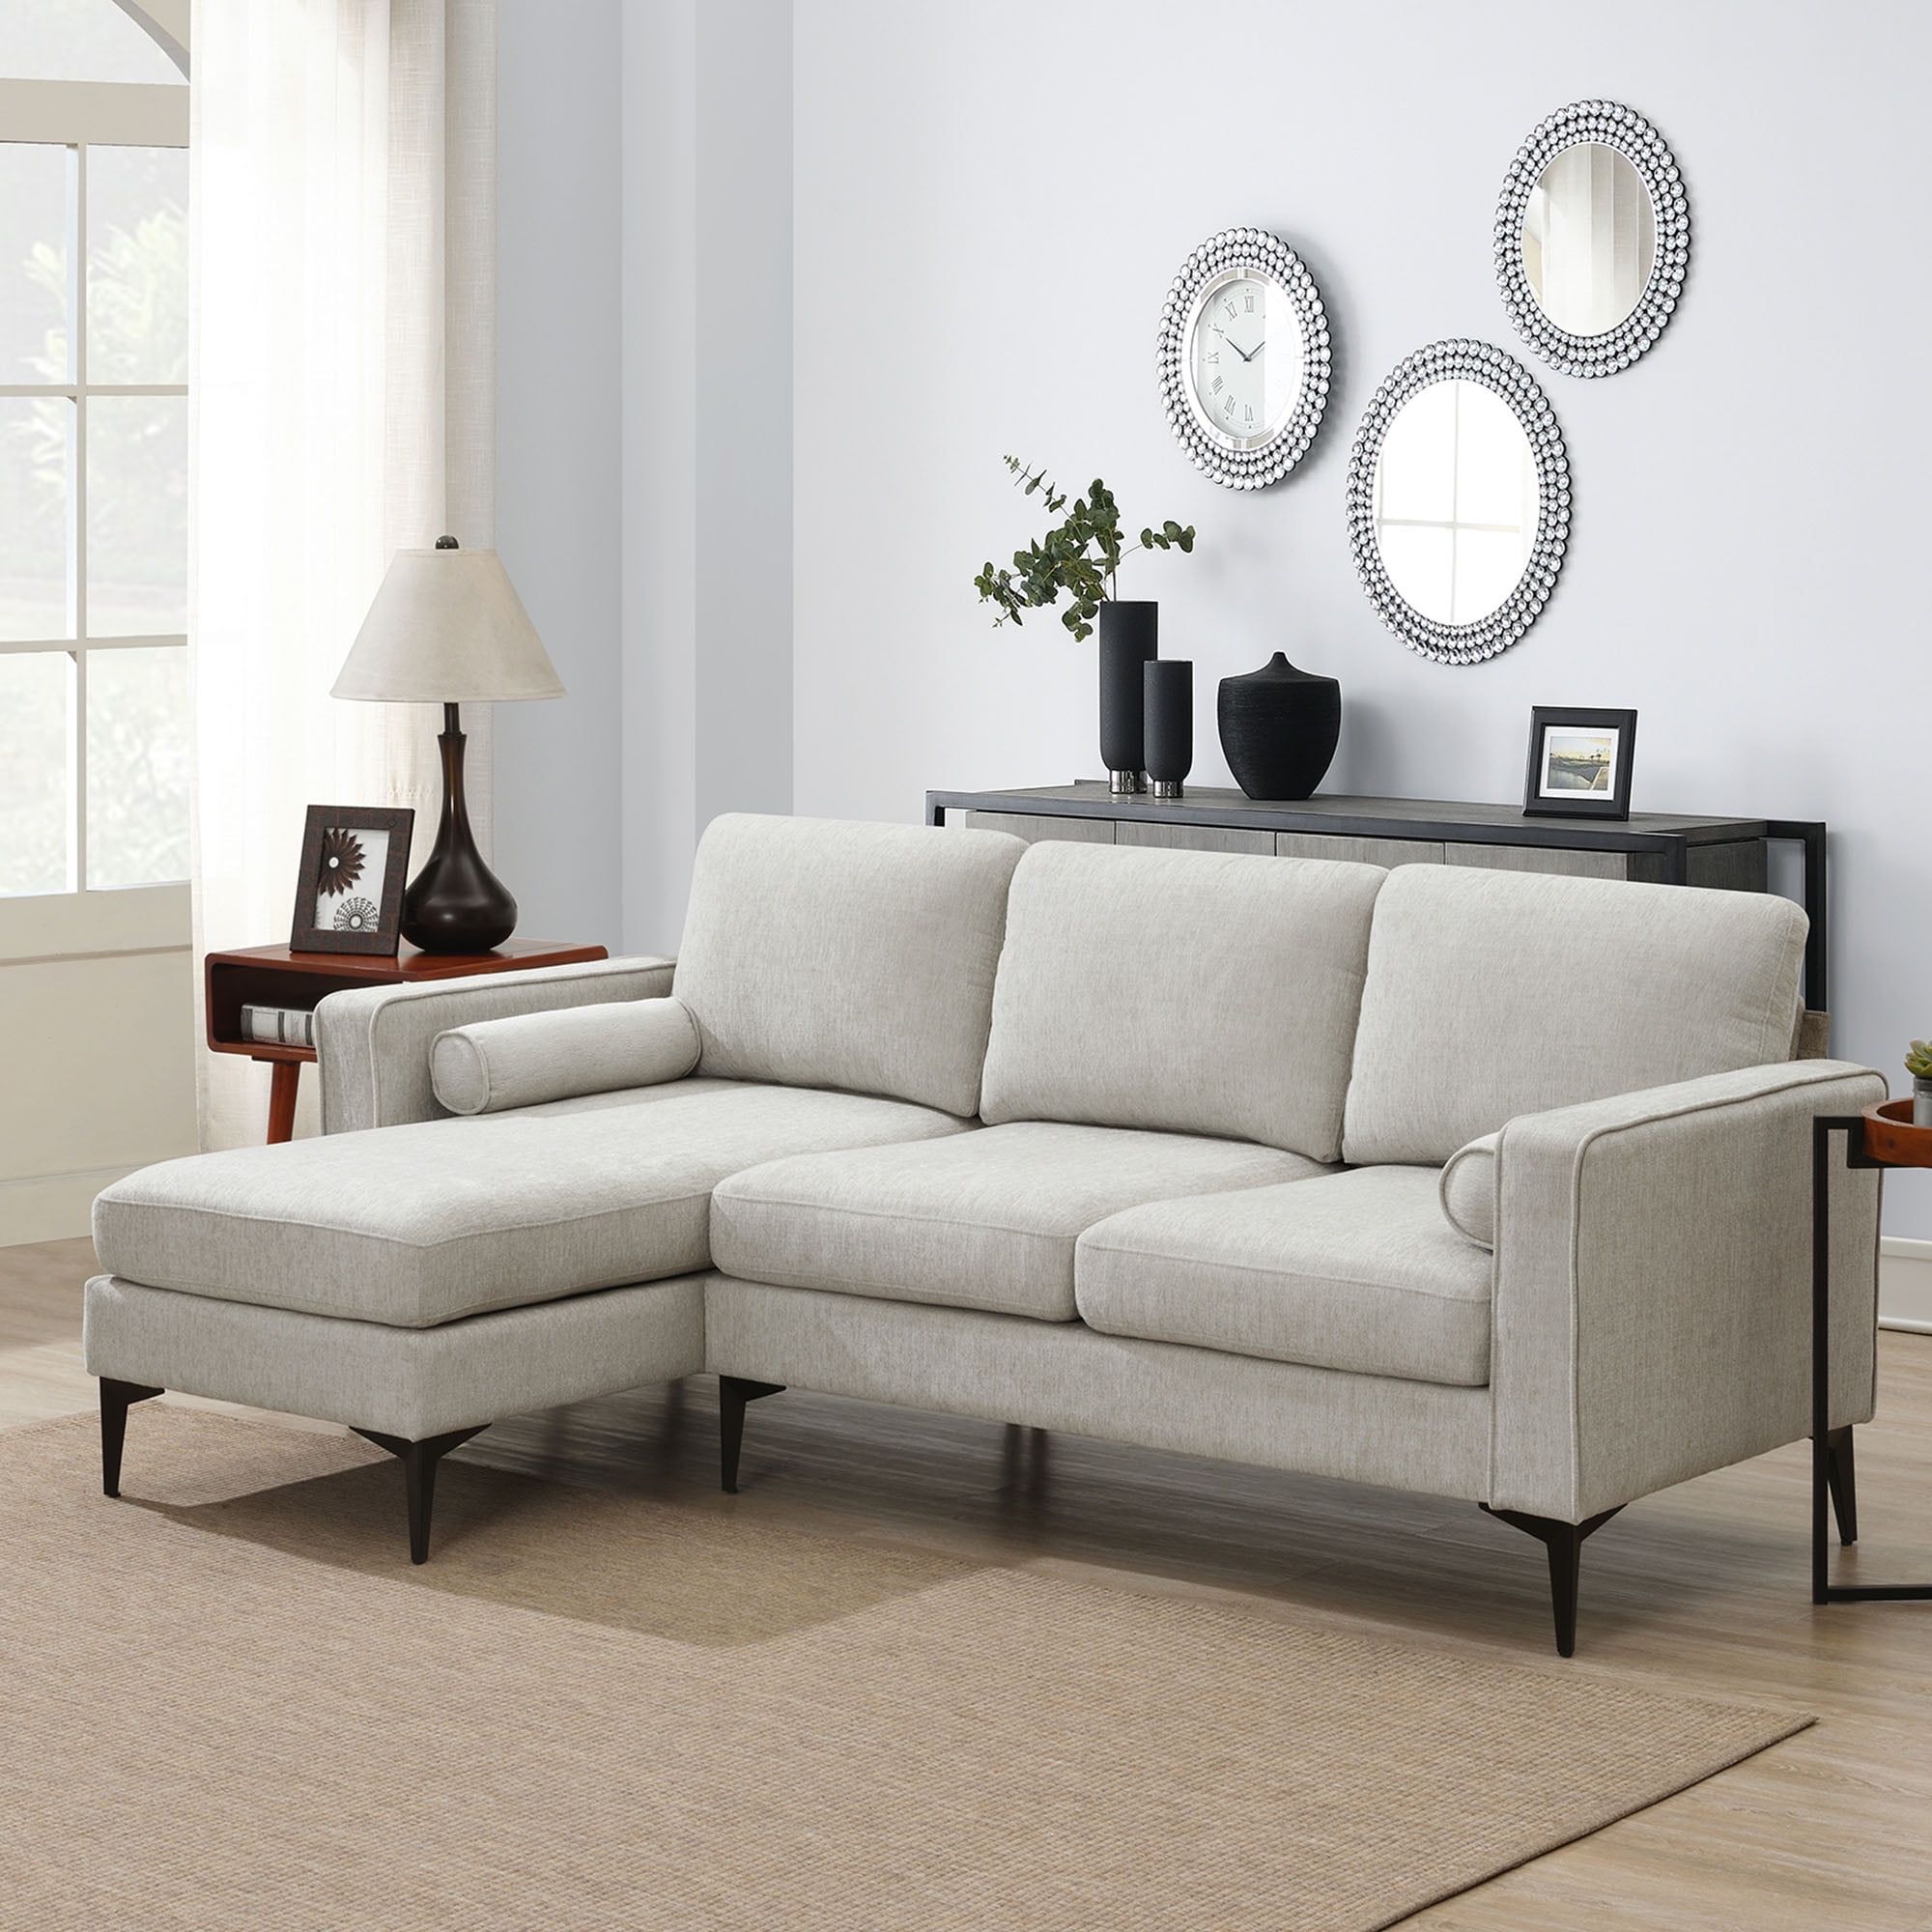 Churanty L Shaped Sofa For Small Spaces Convertible Sectional Sofa With  Reversible Chaise Lounge,Beige – Walmart Within Small L Shaped Sectional Sofas In Beige (View 6 of 15)